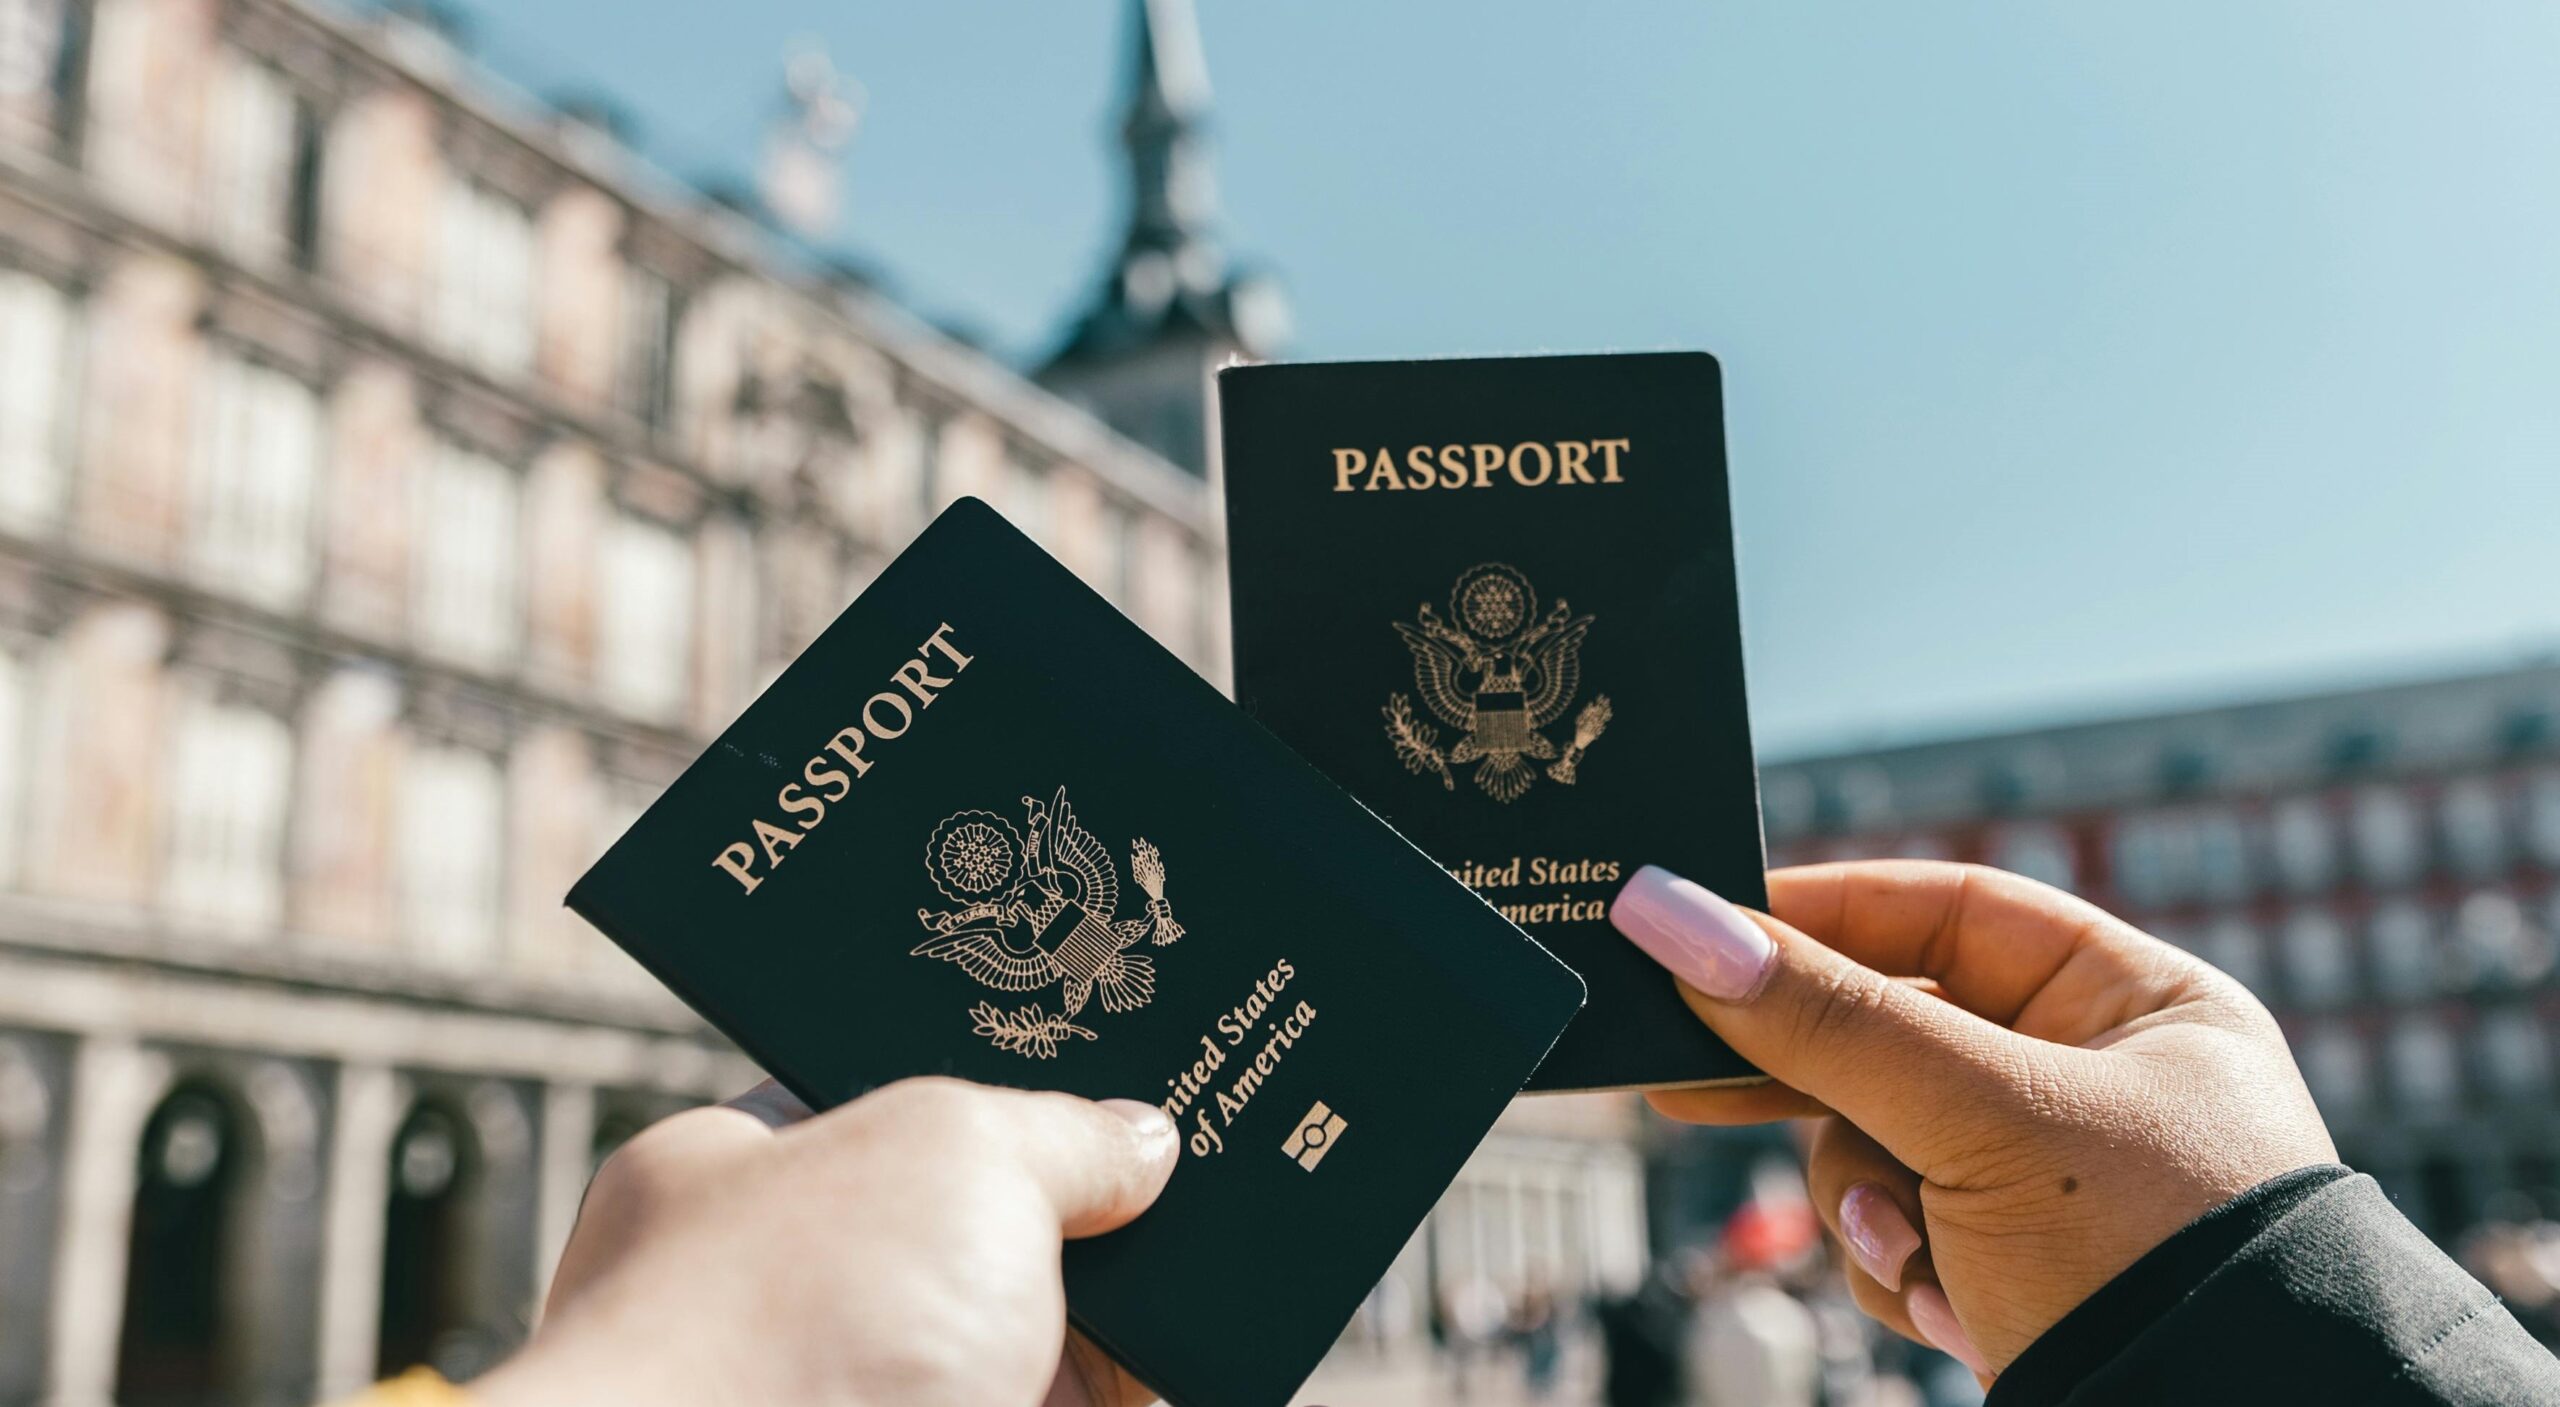 What can go wrong when using a third party passport expediter?